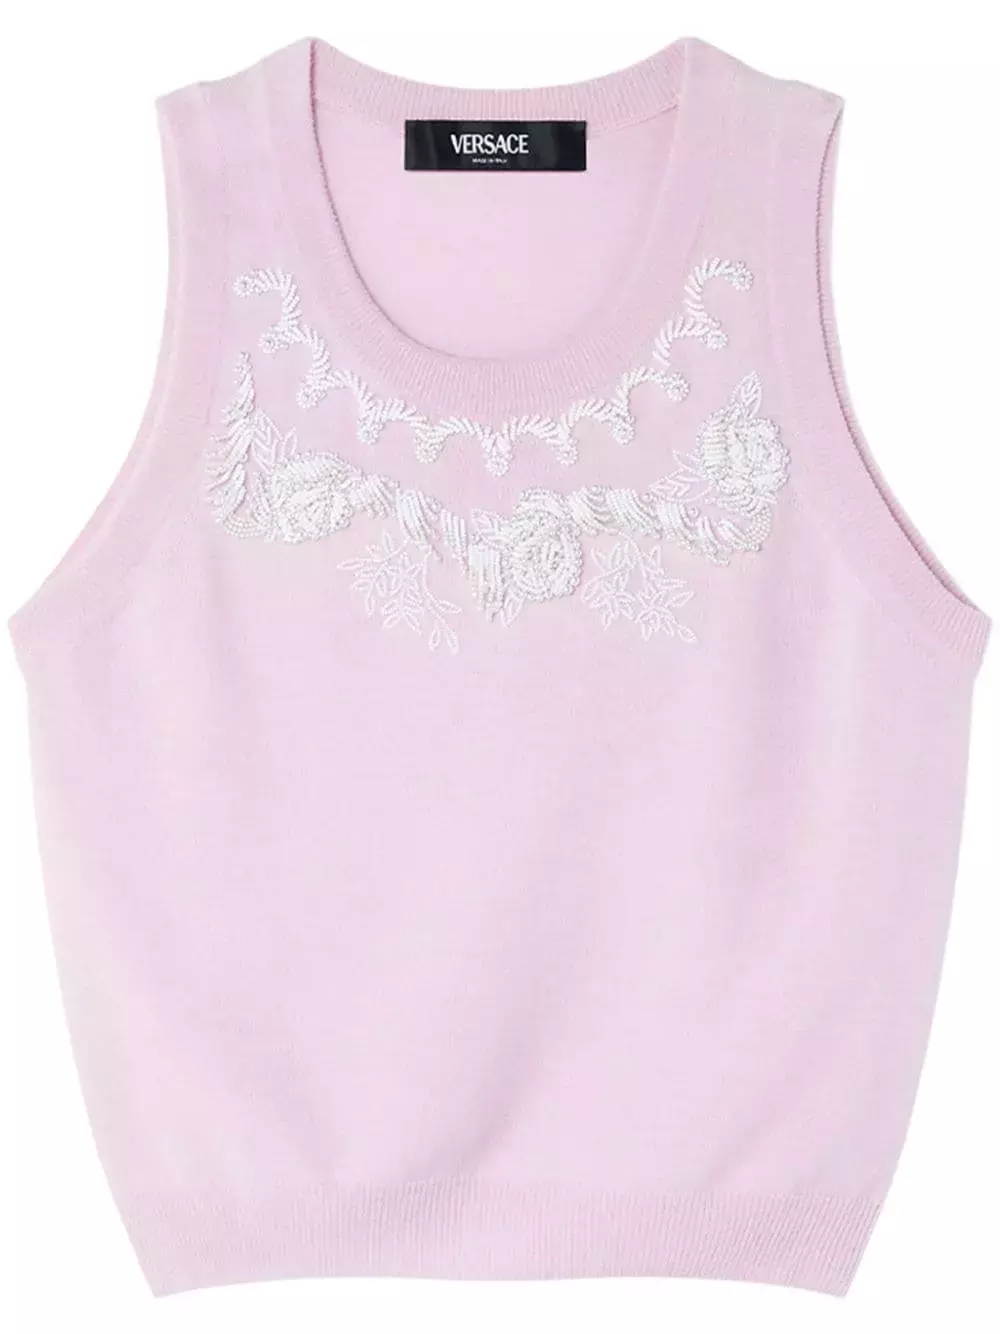 Versace Pink Embroidered Knit Top